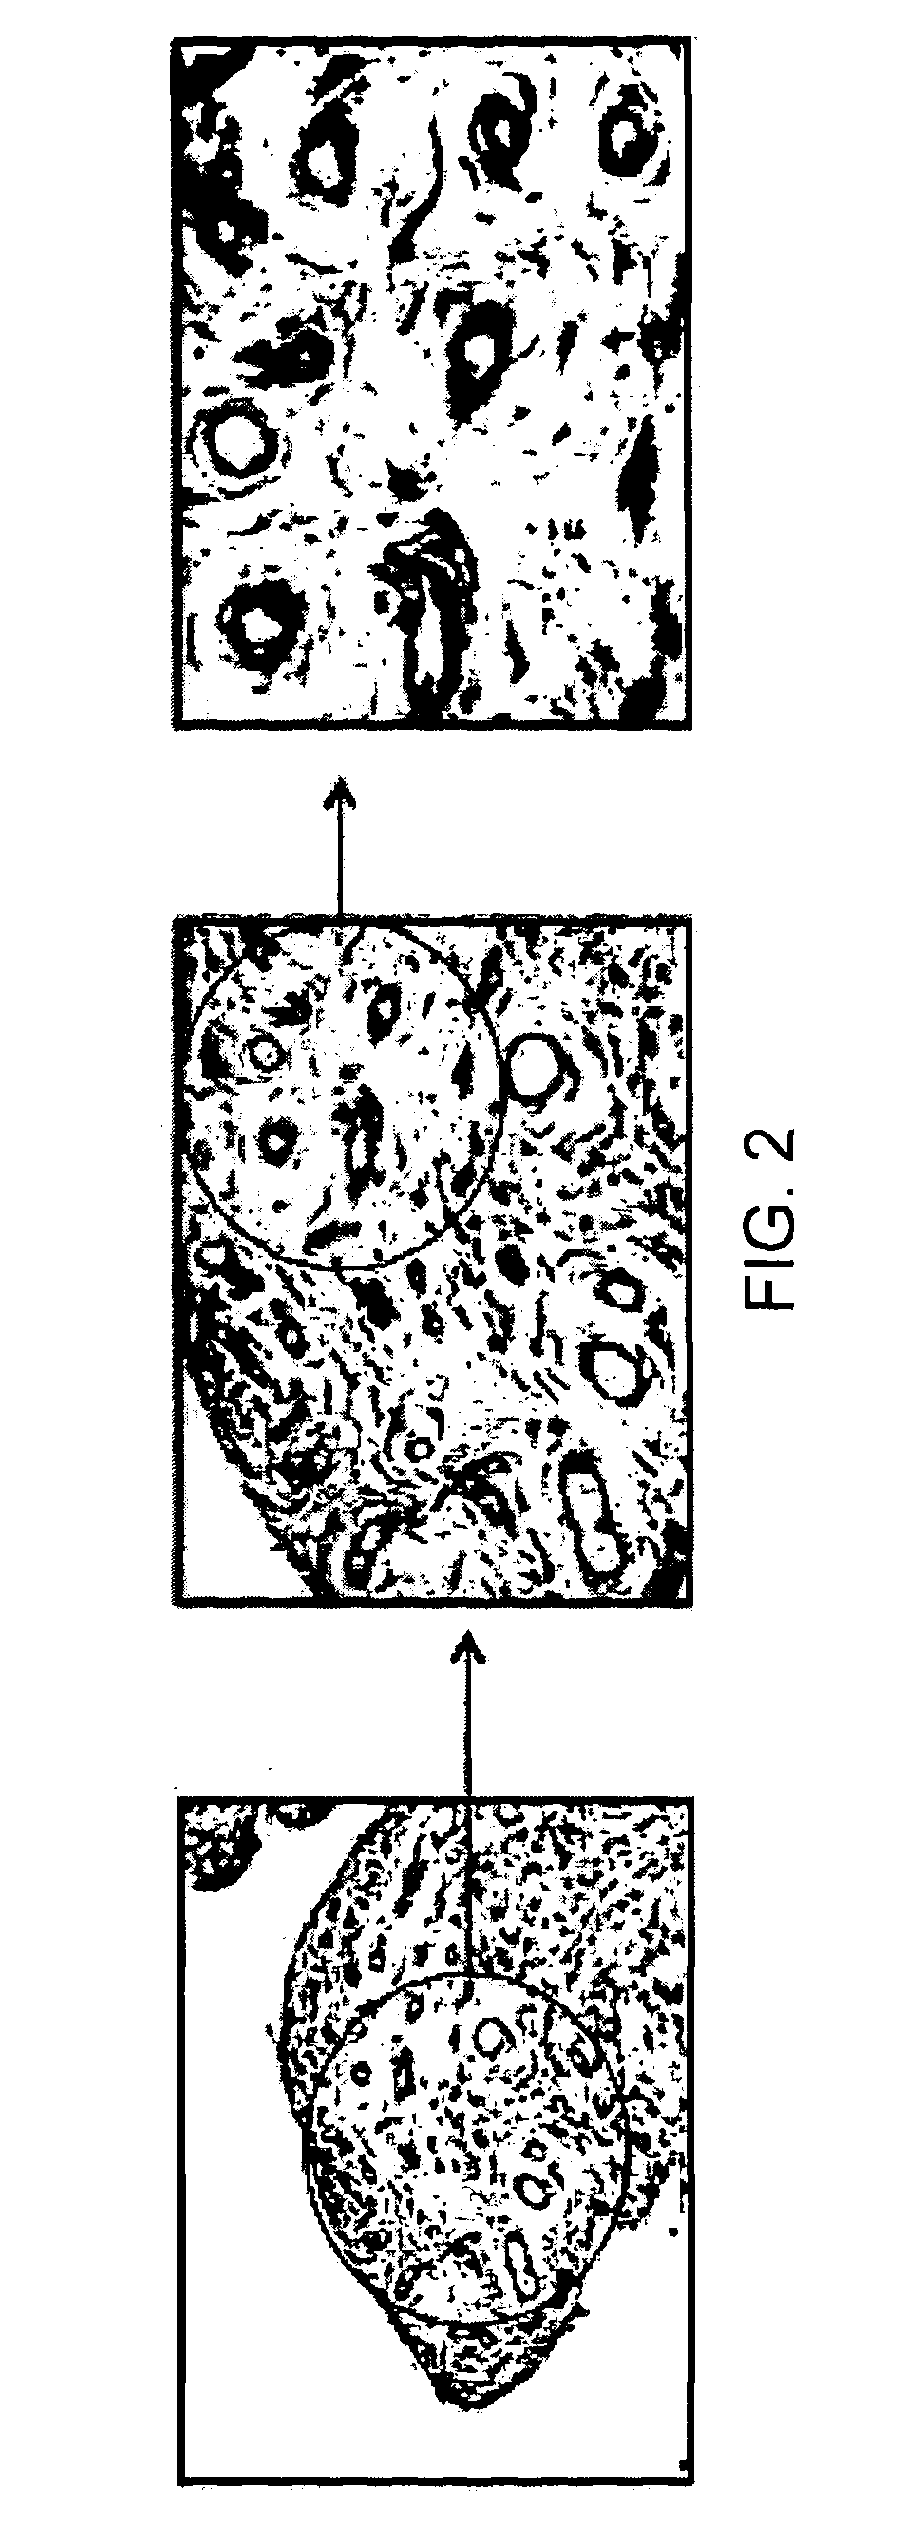 Antibody specifically binding synovial microvasculature of arthritis patients